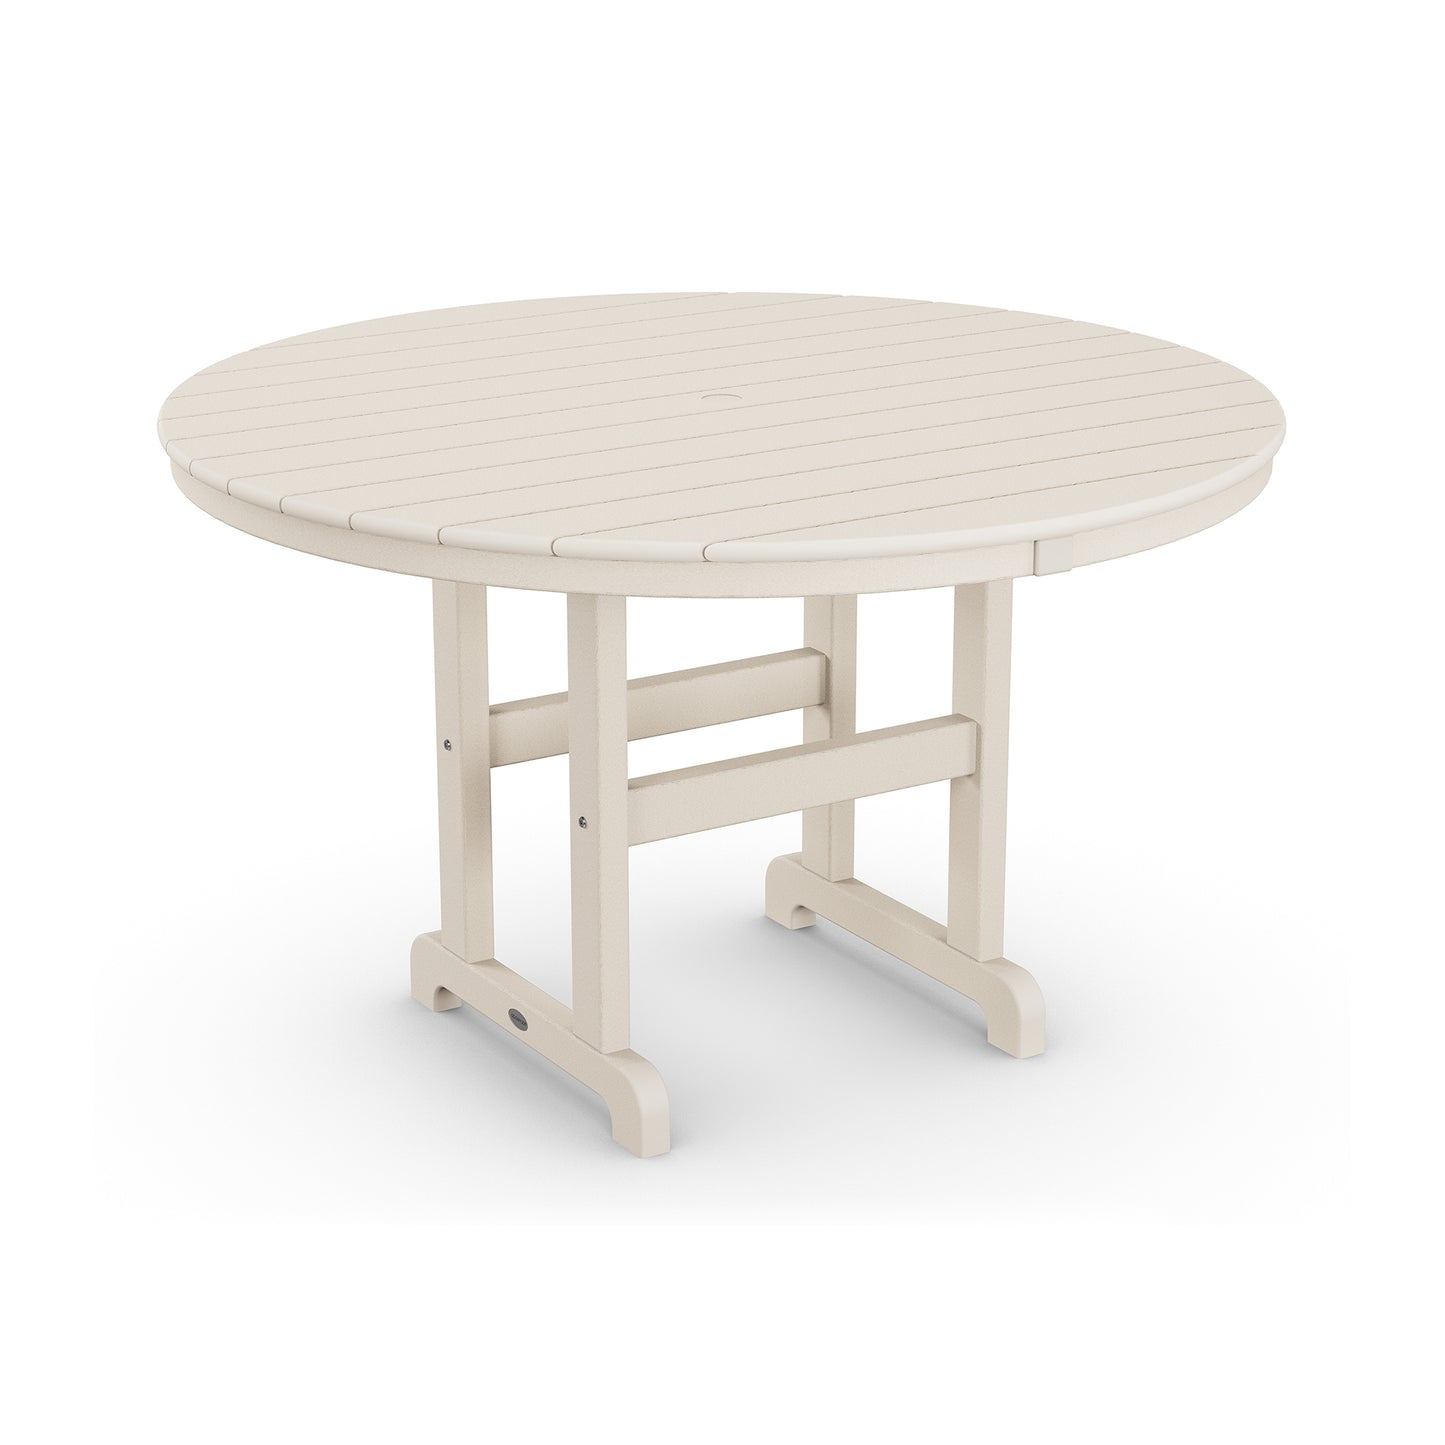 A round, beige POLYWOOD® Outdoor 48" Round Dining Table isolated on a white background. The table features a simple, streamlined design with visible hinges for collapsibility.